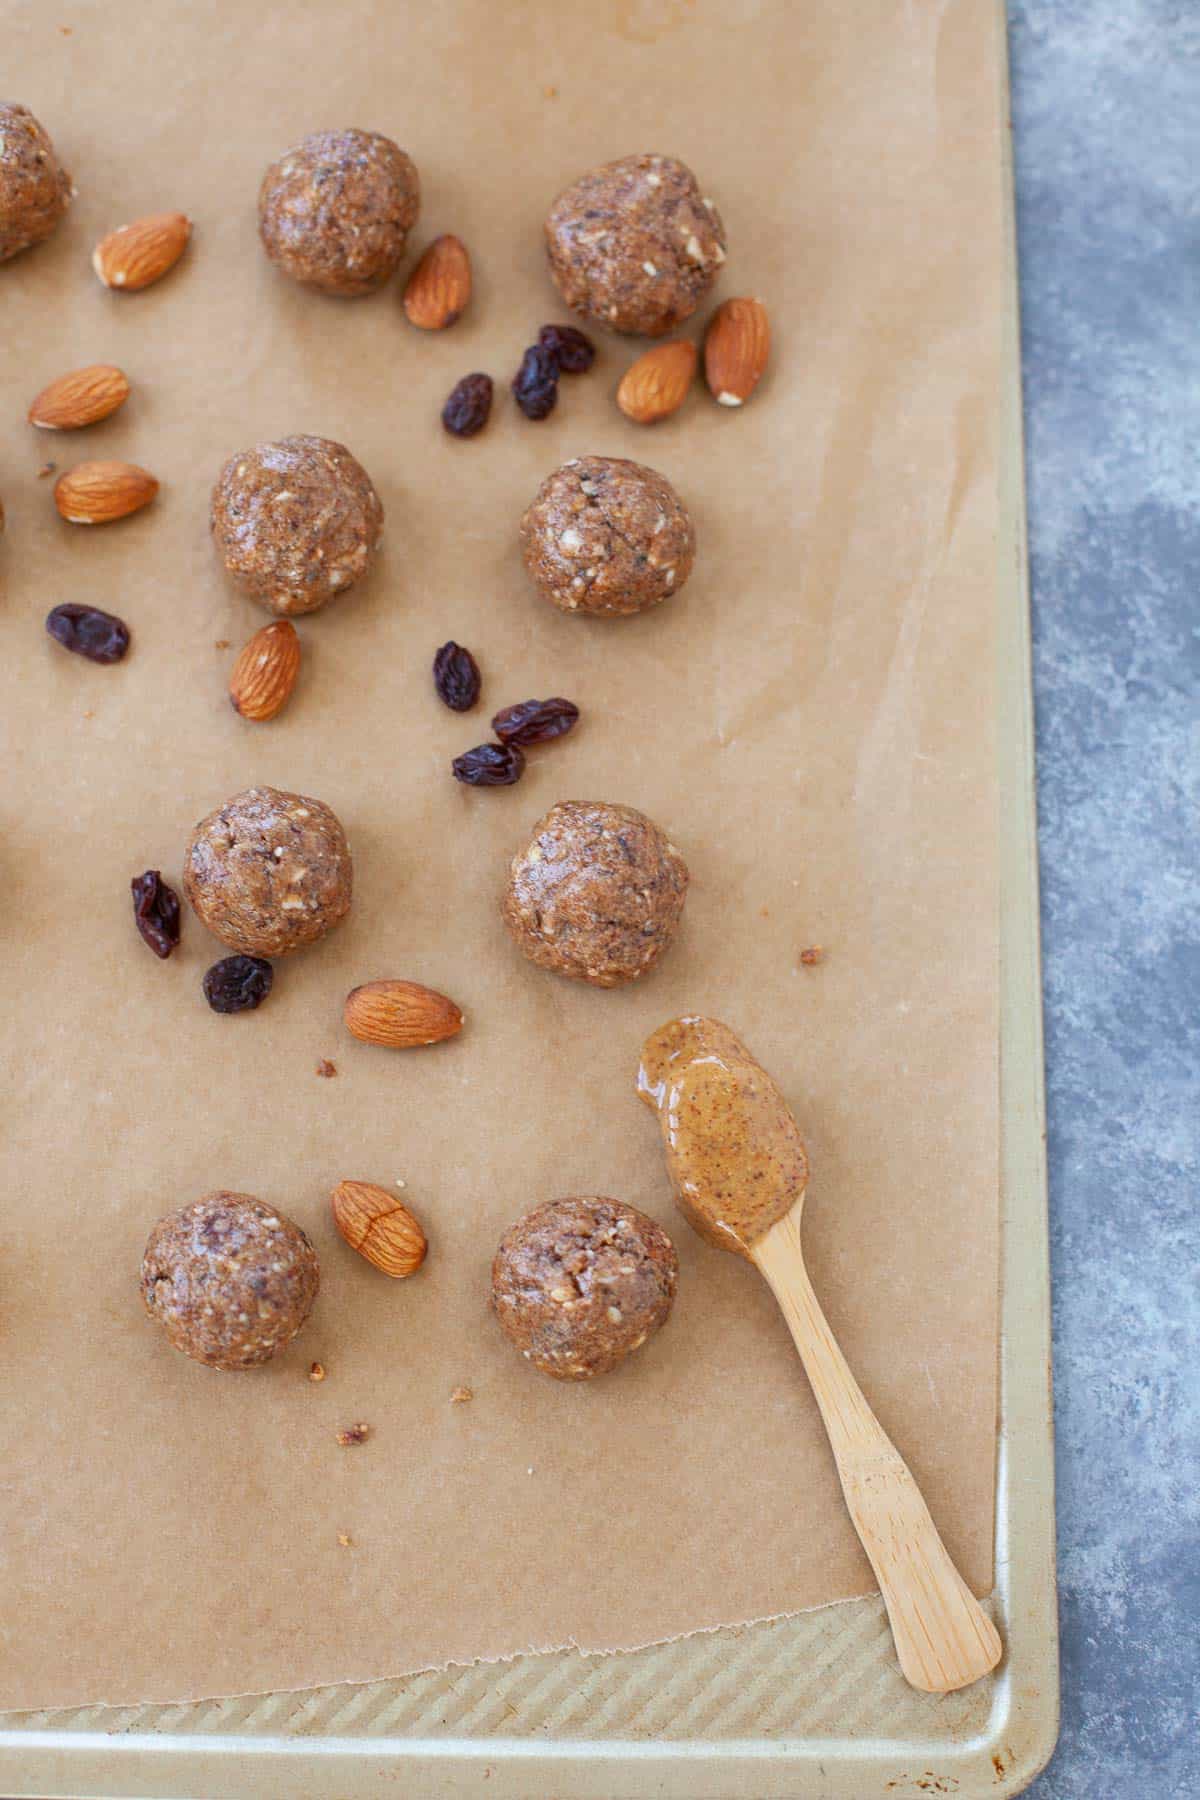 almond butter jelly balls with almonds and raisins on a baking sheet